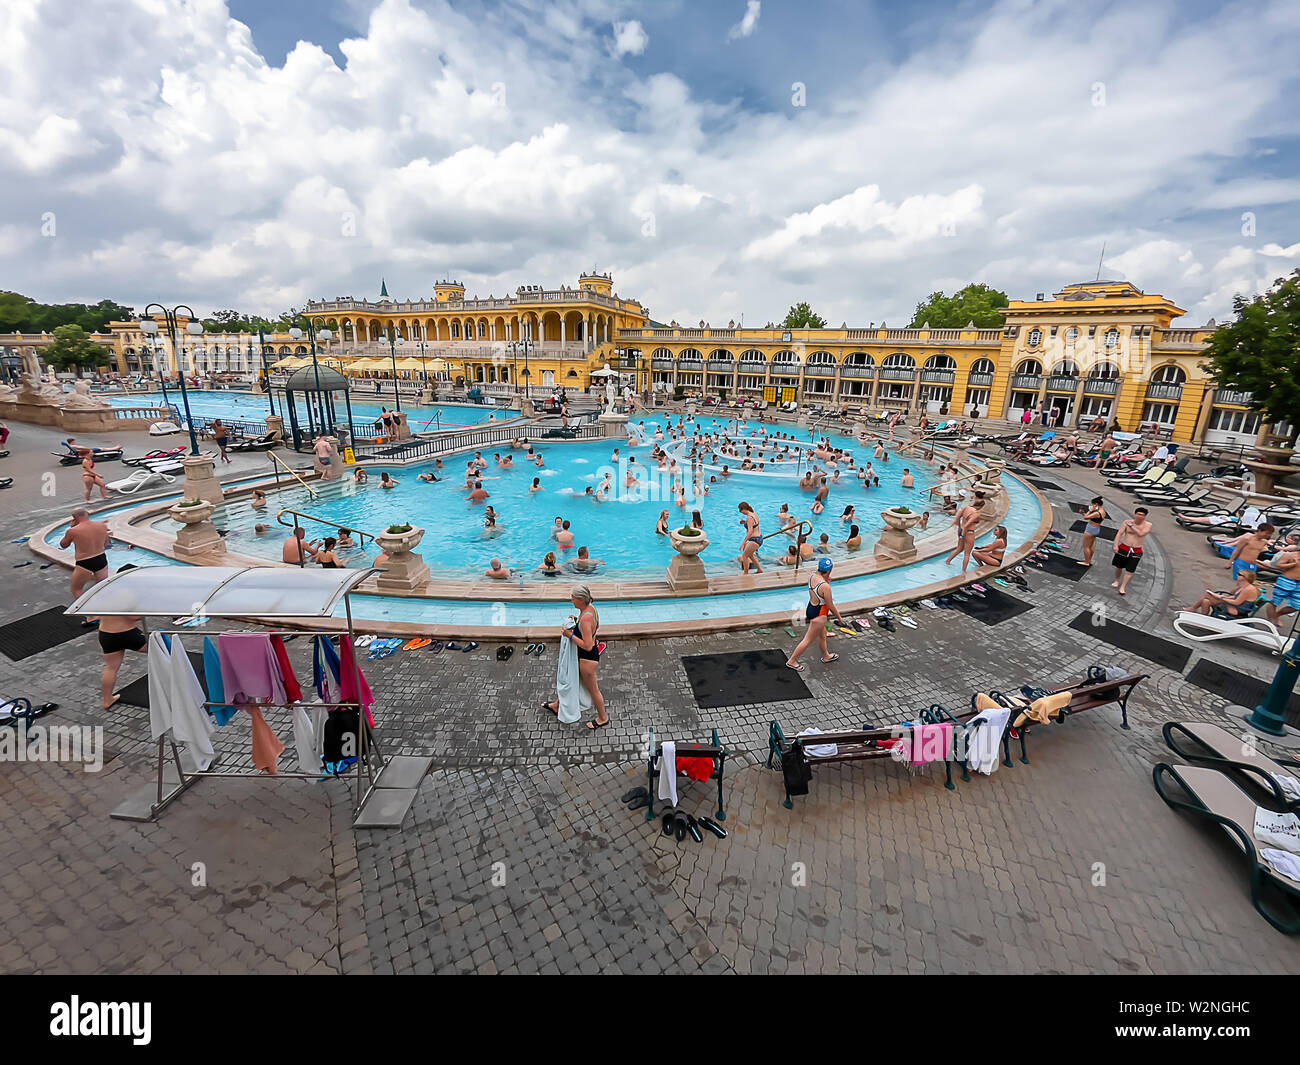 Budapest, Hungary - May 29, 2019 : Szechenyi Baths in Budapest, Thermal Bath - open air thermal bath complex in Budapest. Hungary Stock Photo